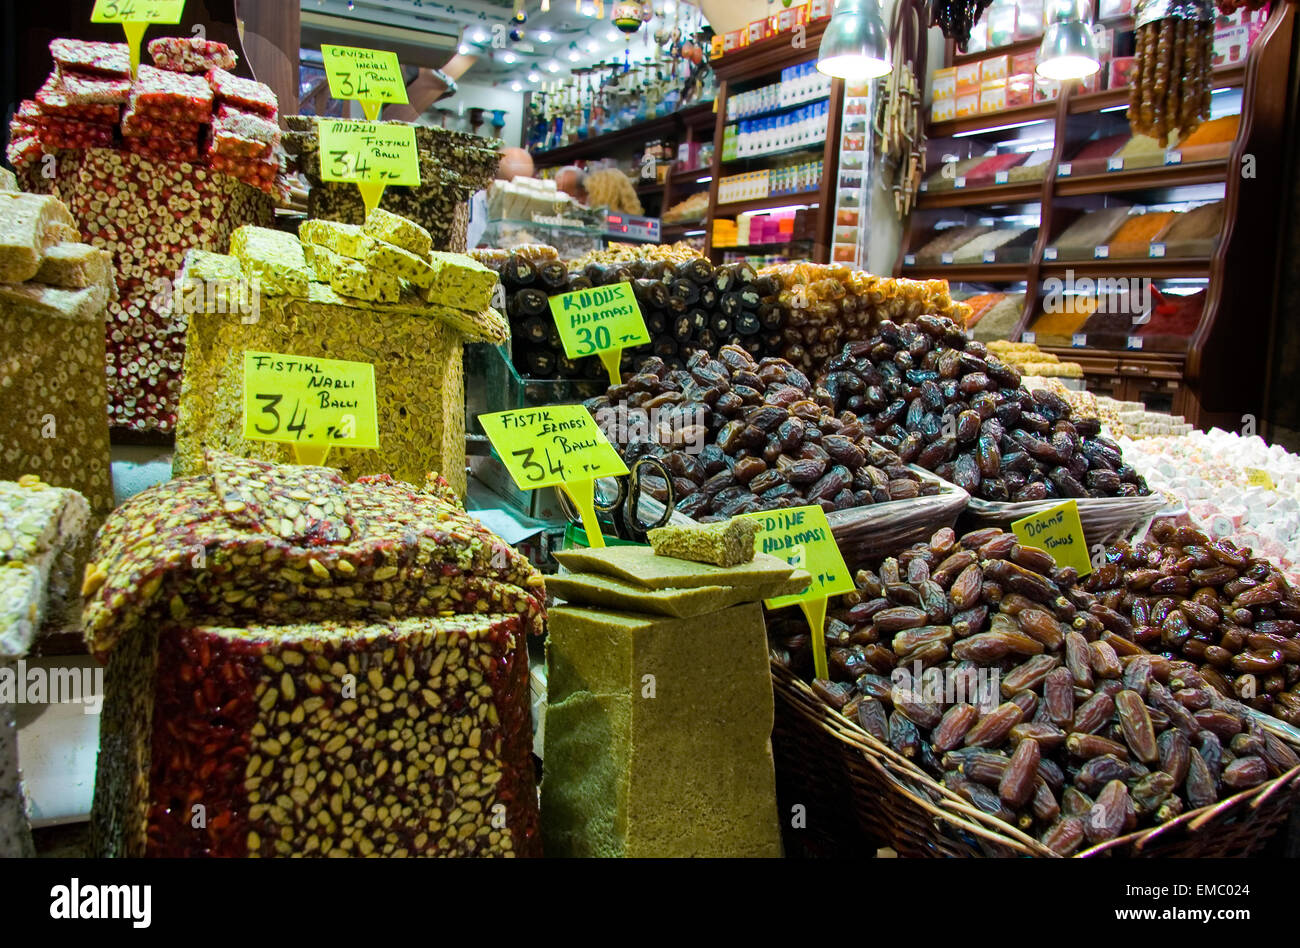 Showing of Turkish sweets, dried fruits and nuts in a stall in the Istanbul spice market Stock Photo